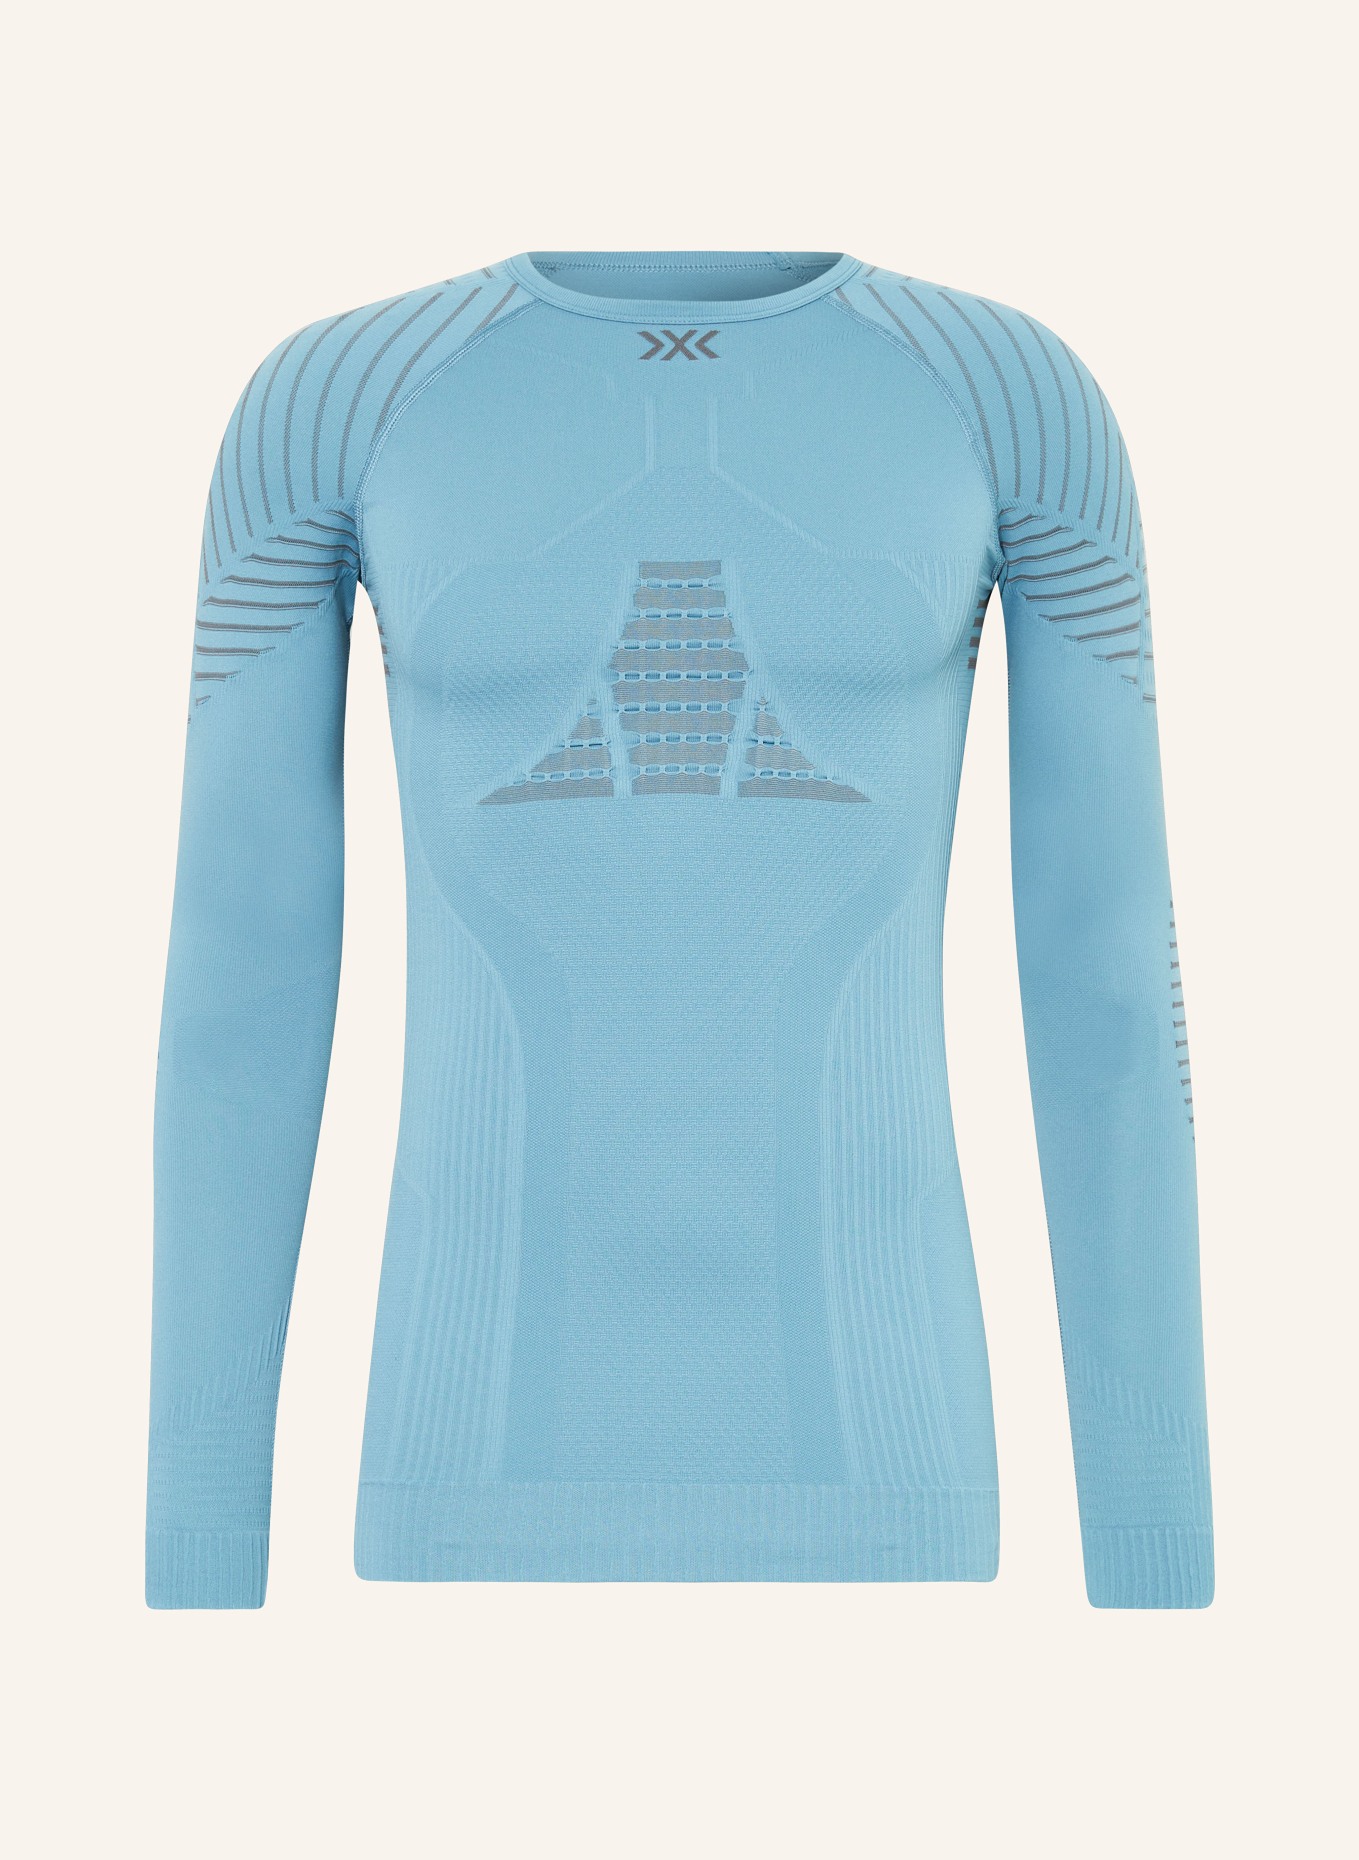 X-BIONIC Functional underwear shirt X-BIONIC® INVENT 4.0, Color: BLUE GRAY (Image 1)